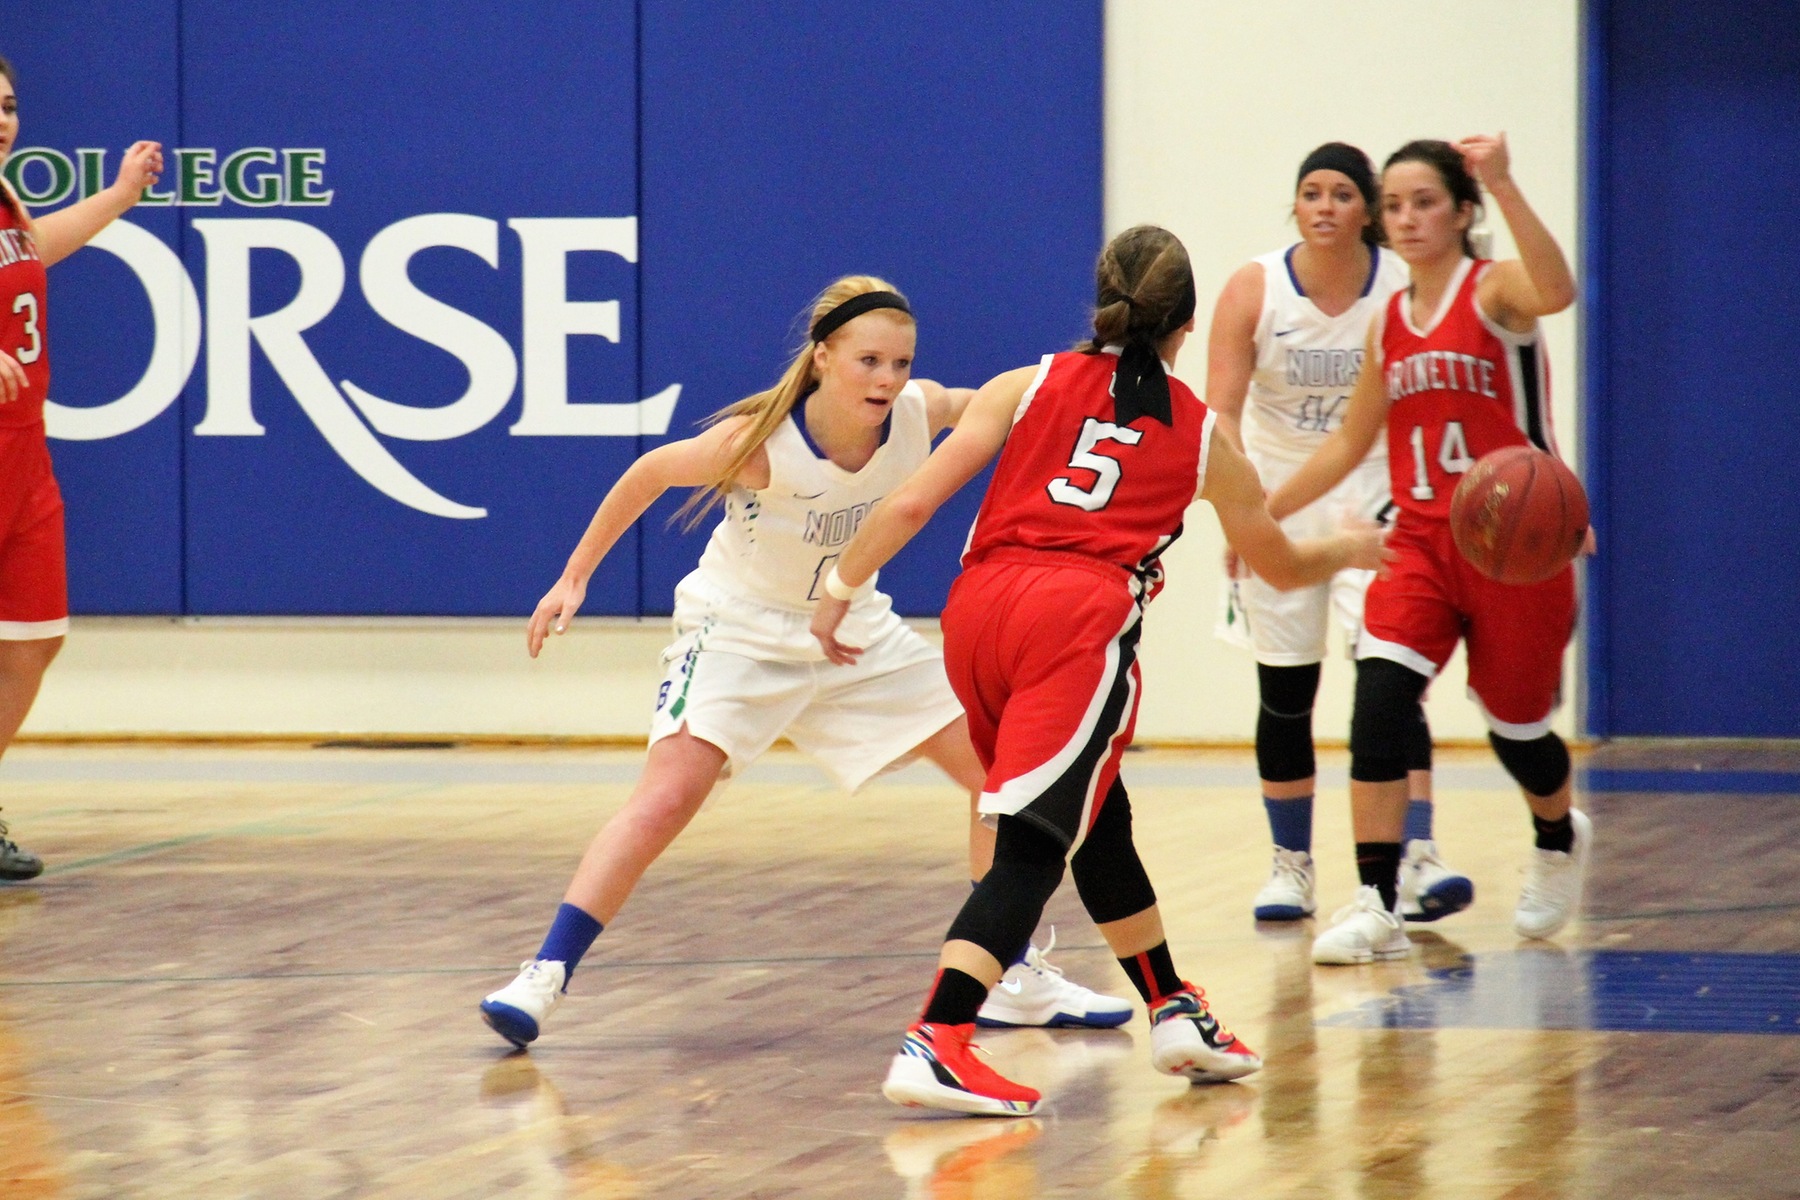 Paige Welch in a defensive stance as her opponent dribbles right